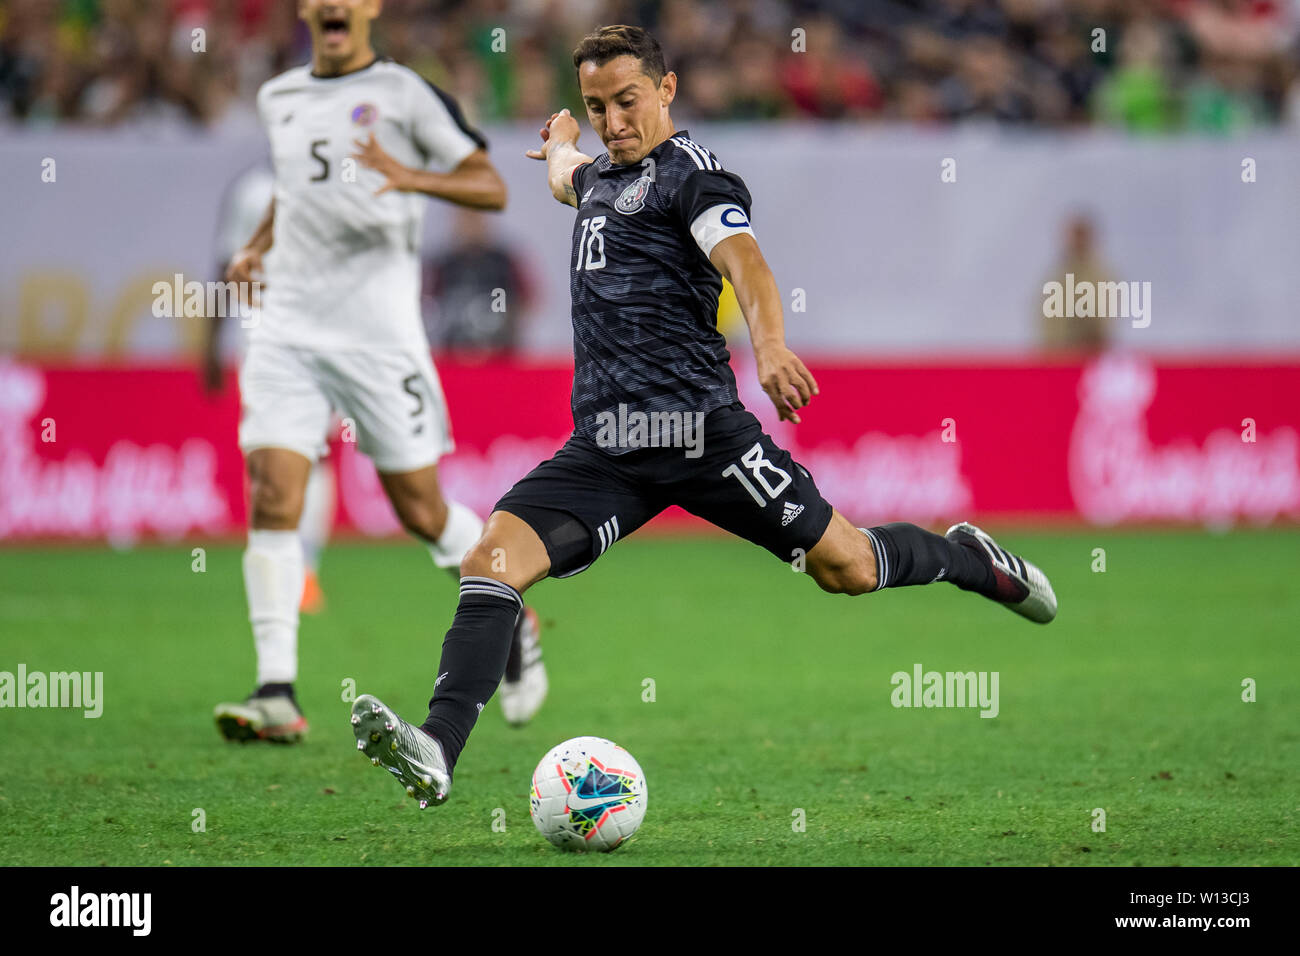 June 29, 2019: Mexico midfielder Andres Guardado (18) controls the ball during the 2nd half of a CONCACAF Gold Cup quarterfinals soccer match between Costa Rica and Mexico at NRG Stadium in Houston, TX. Mexico won on penalty kicks 1-1 (5-4).Trask Smith/CSM Stock Photo